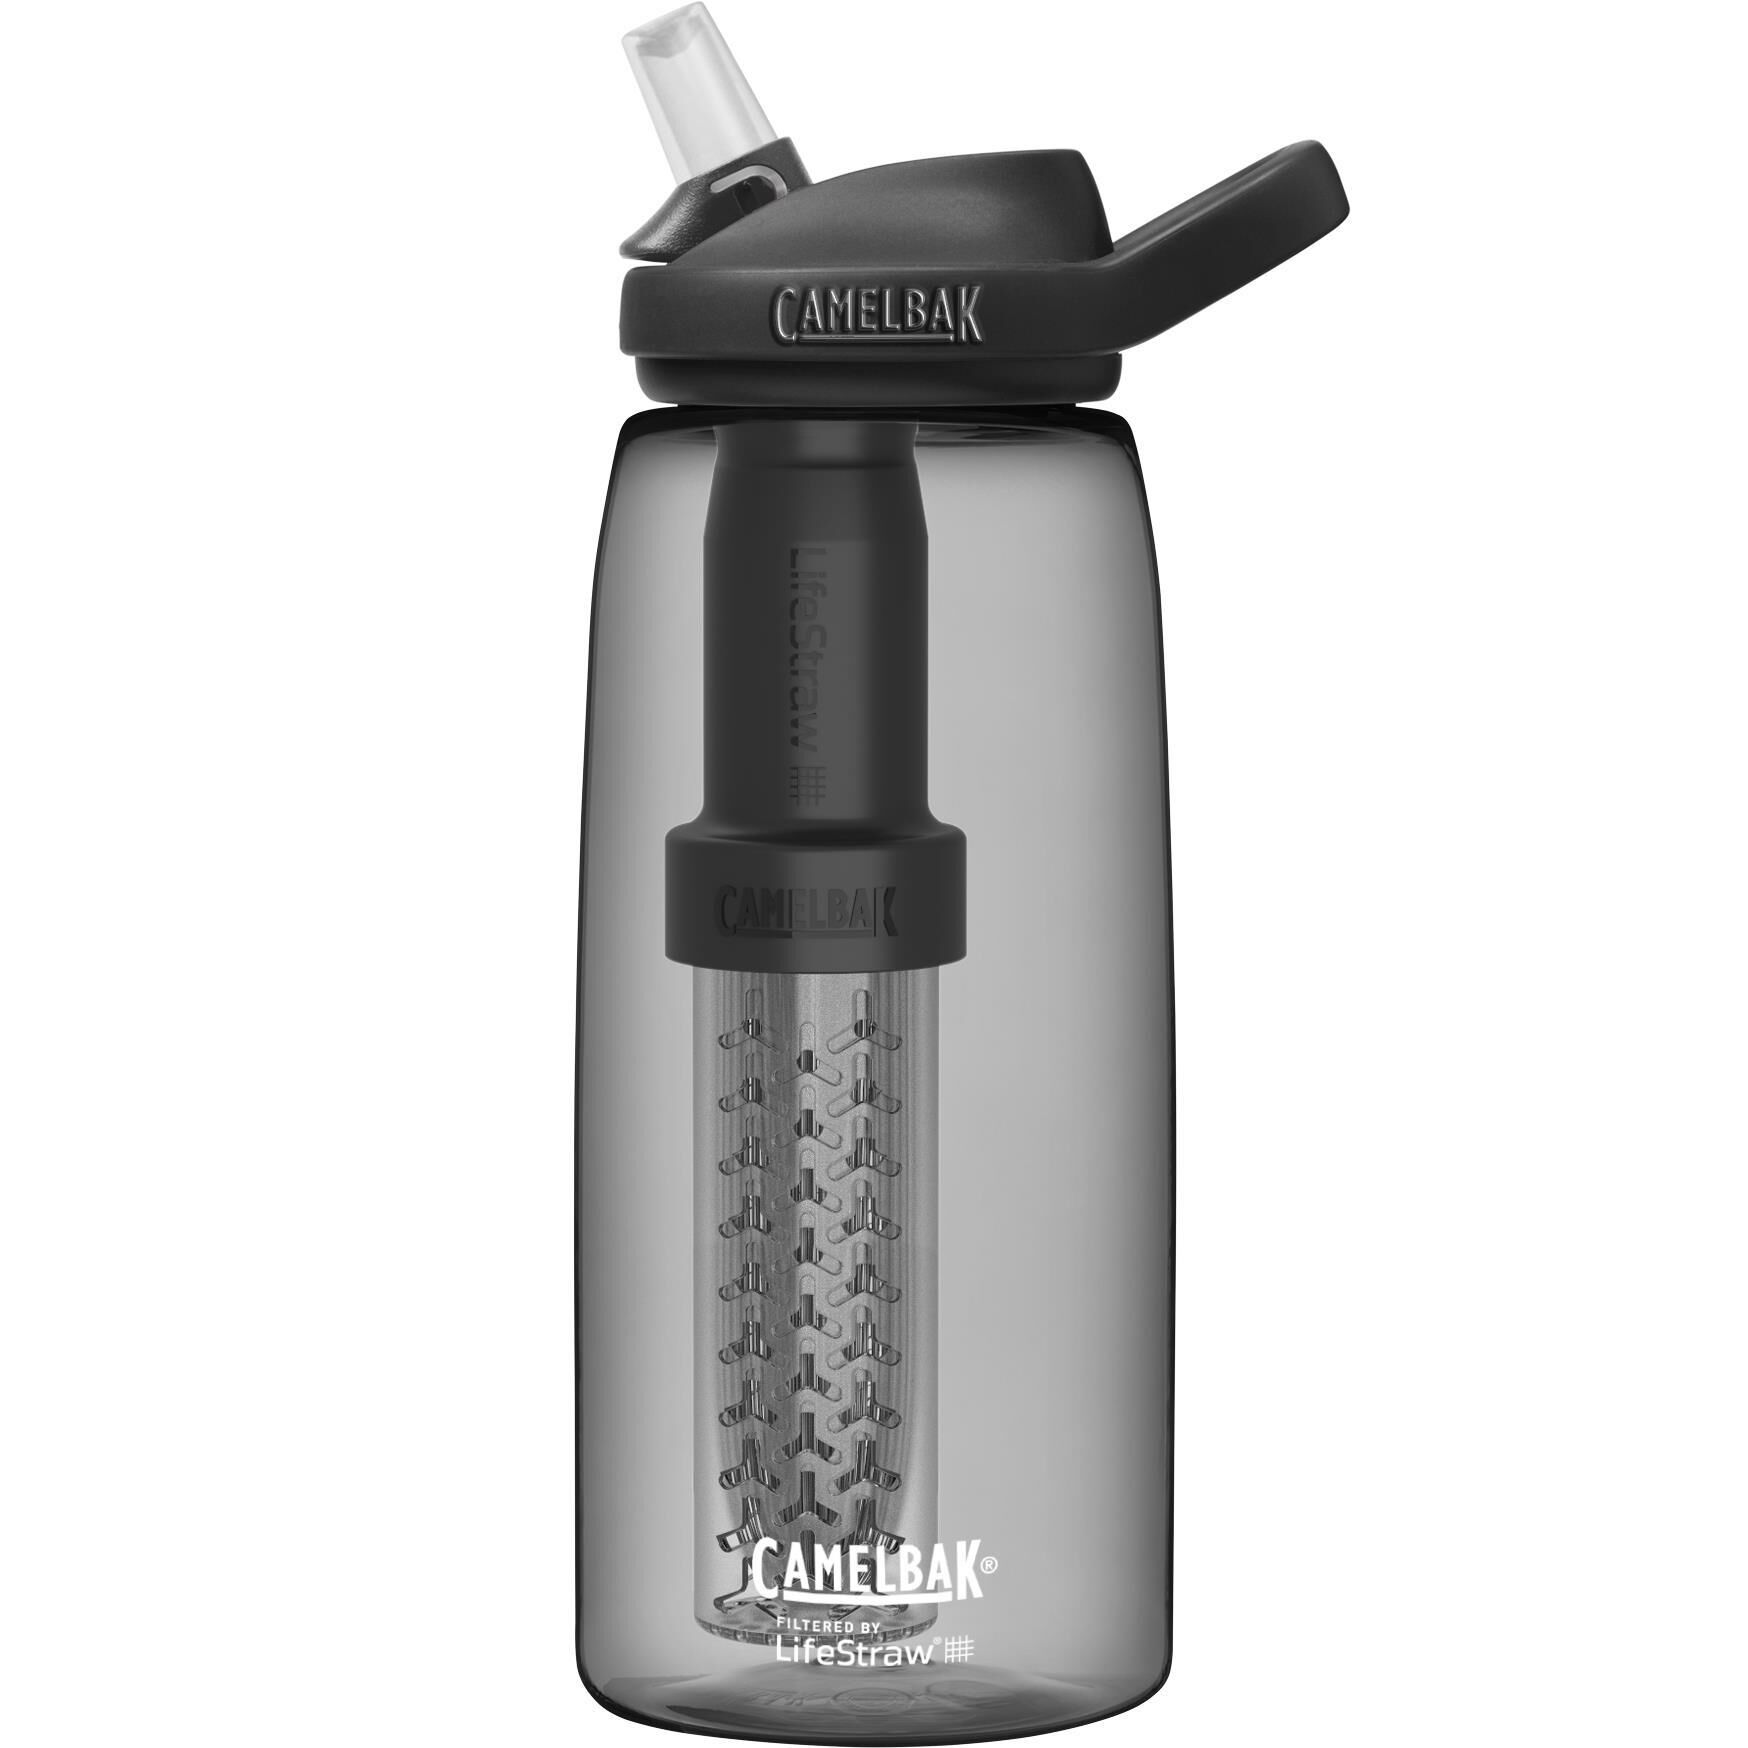 CAMELBAK Eddy+ Filtered By Lifestraw 1L Water Bottle